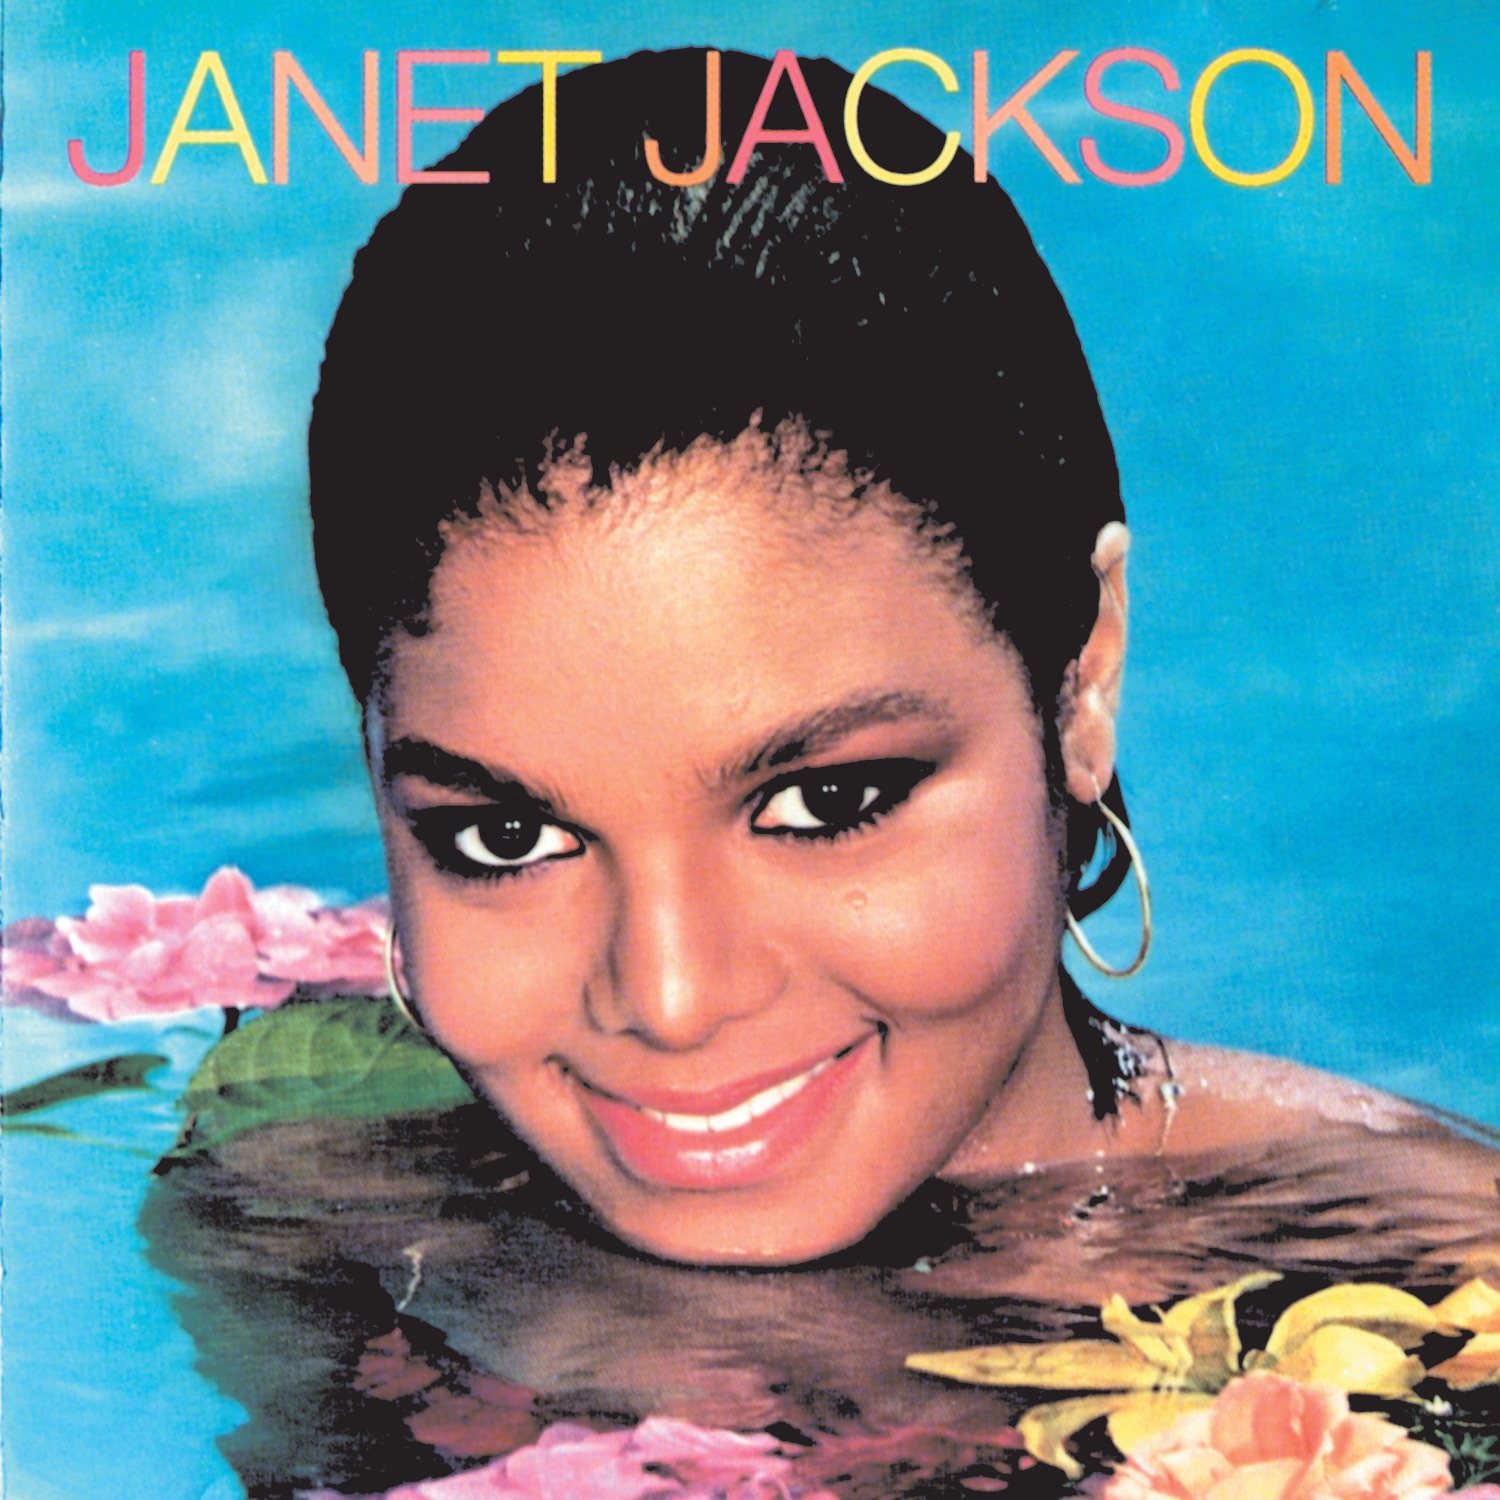 Art for Young Love by Janet Jackson